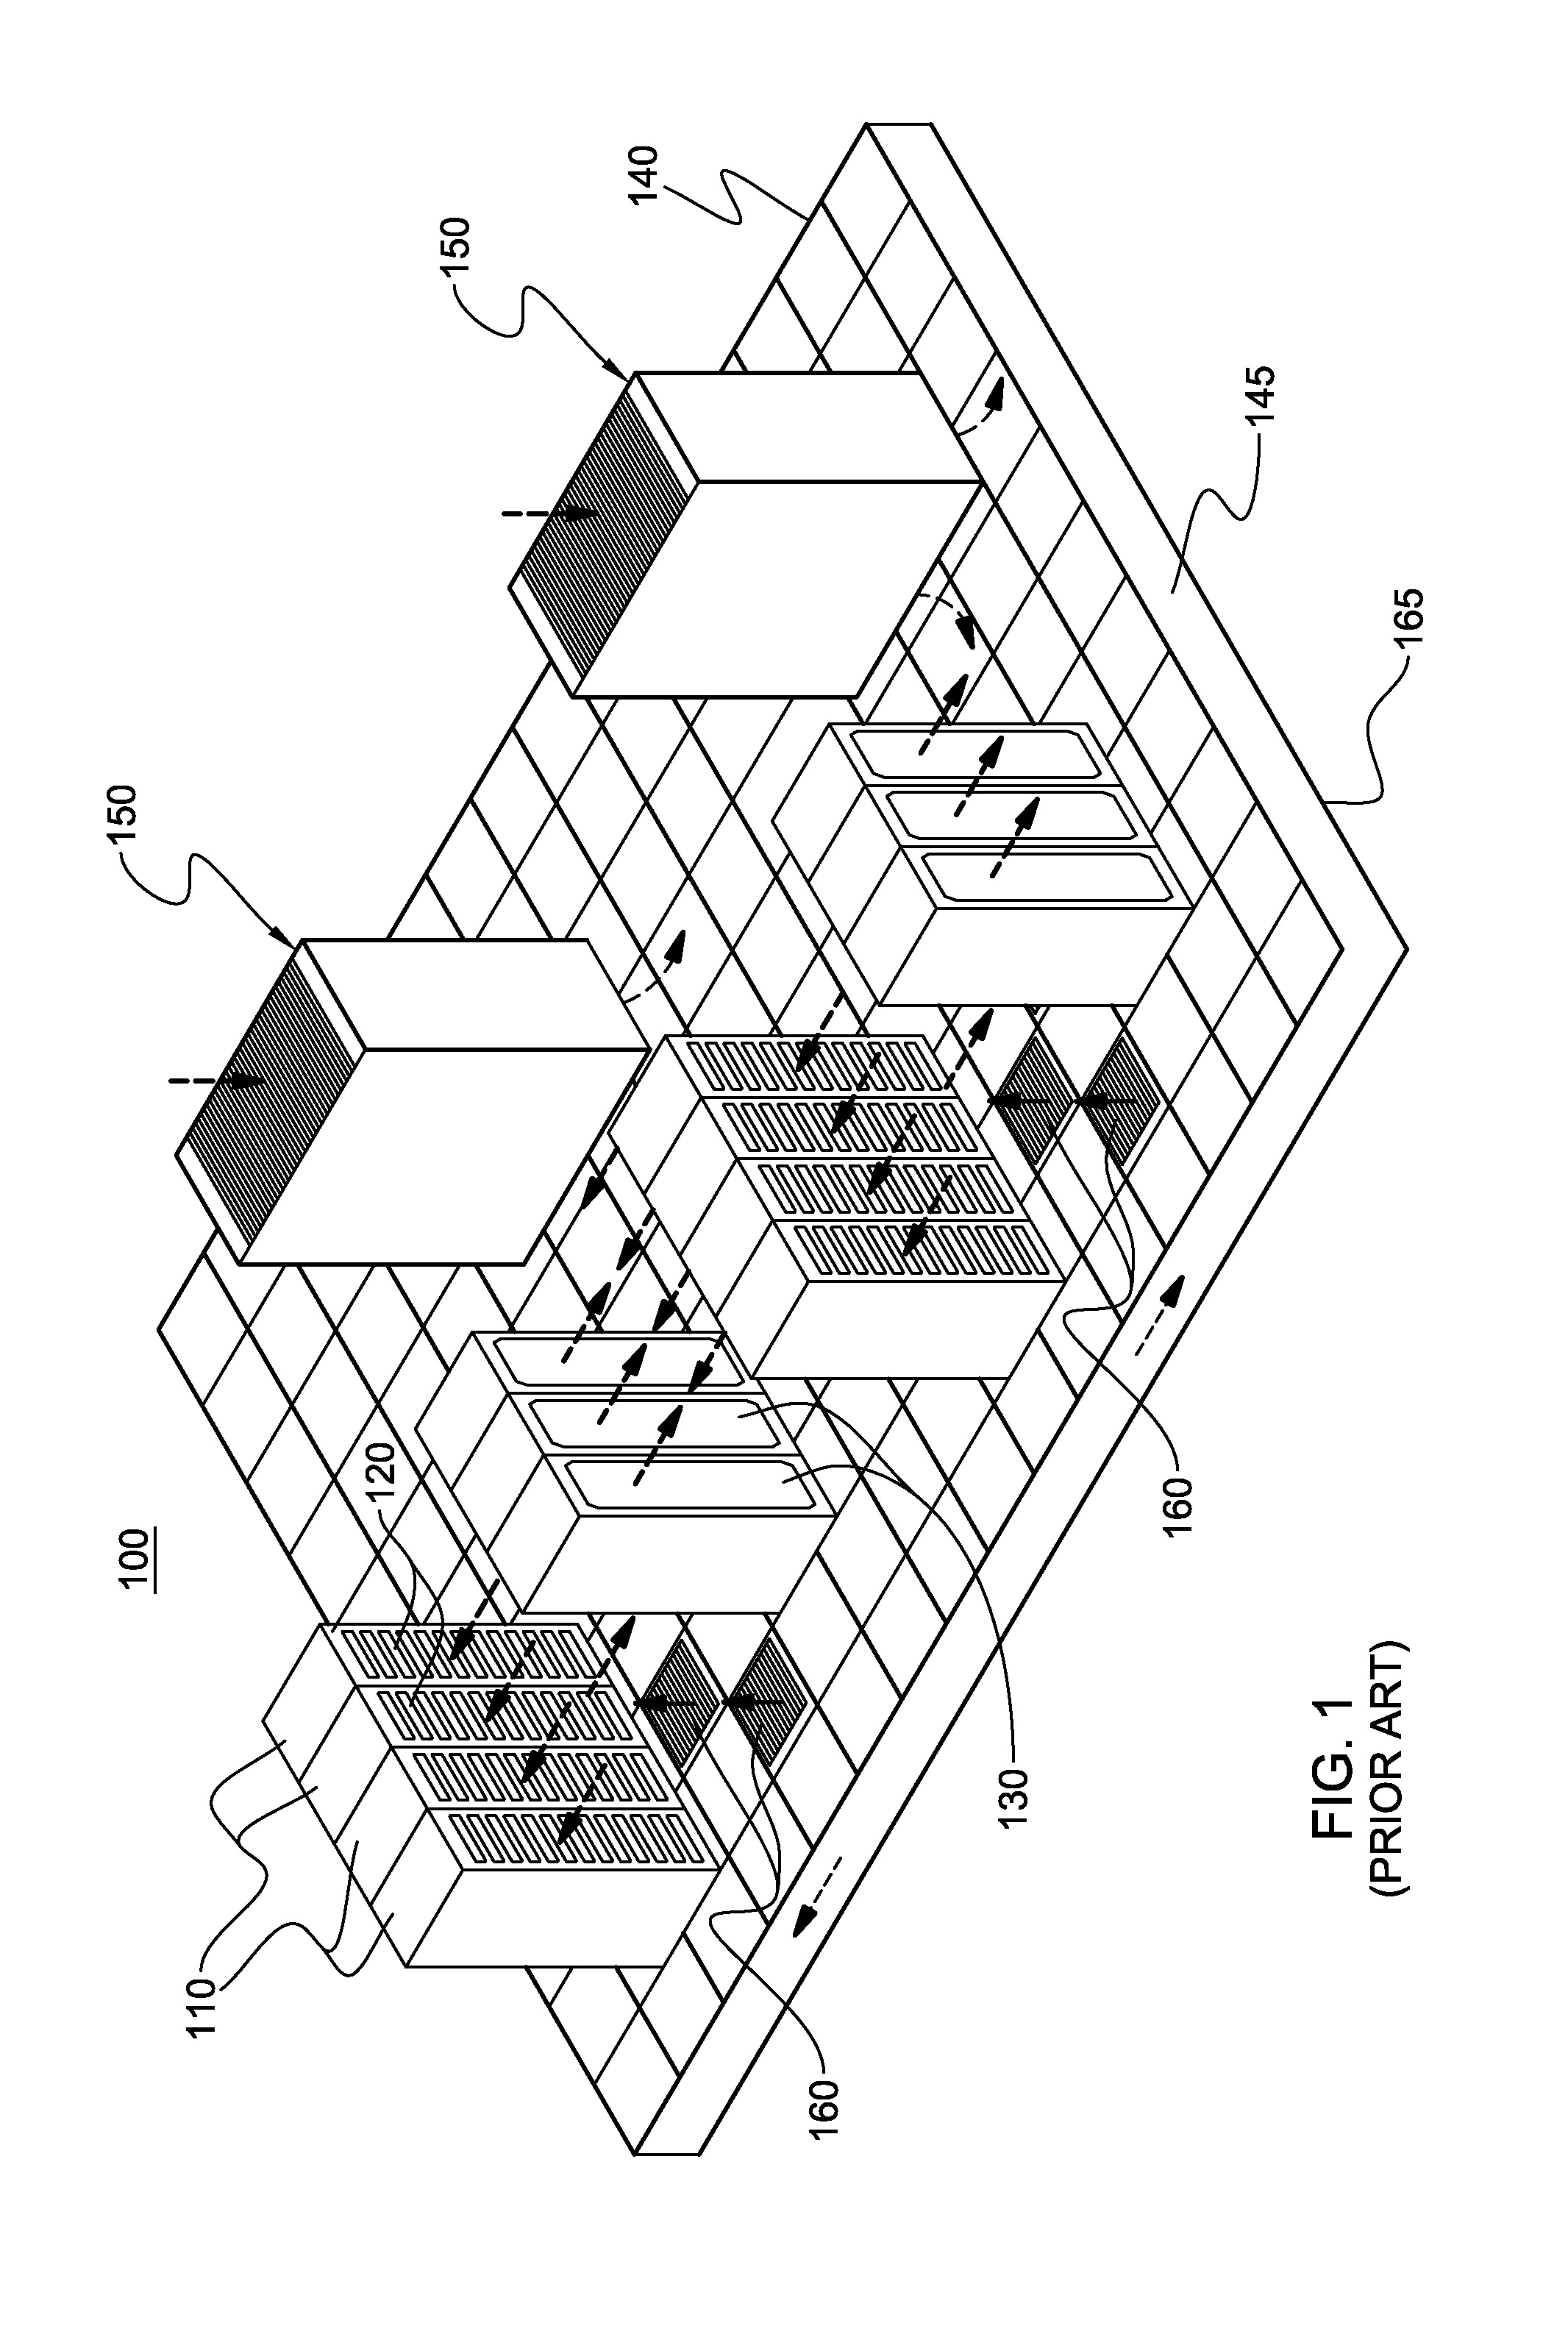 Thermoelectric-enhanced, vapor-condenser facilitating immersion-cooling of electronic component(s)